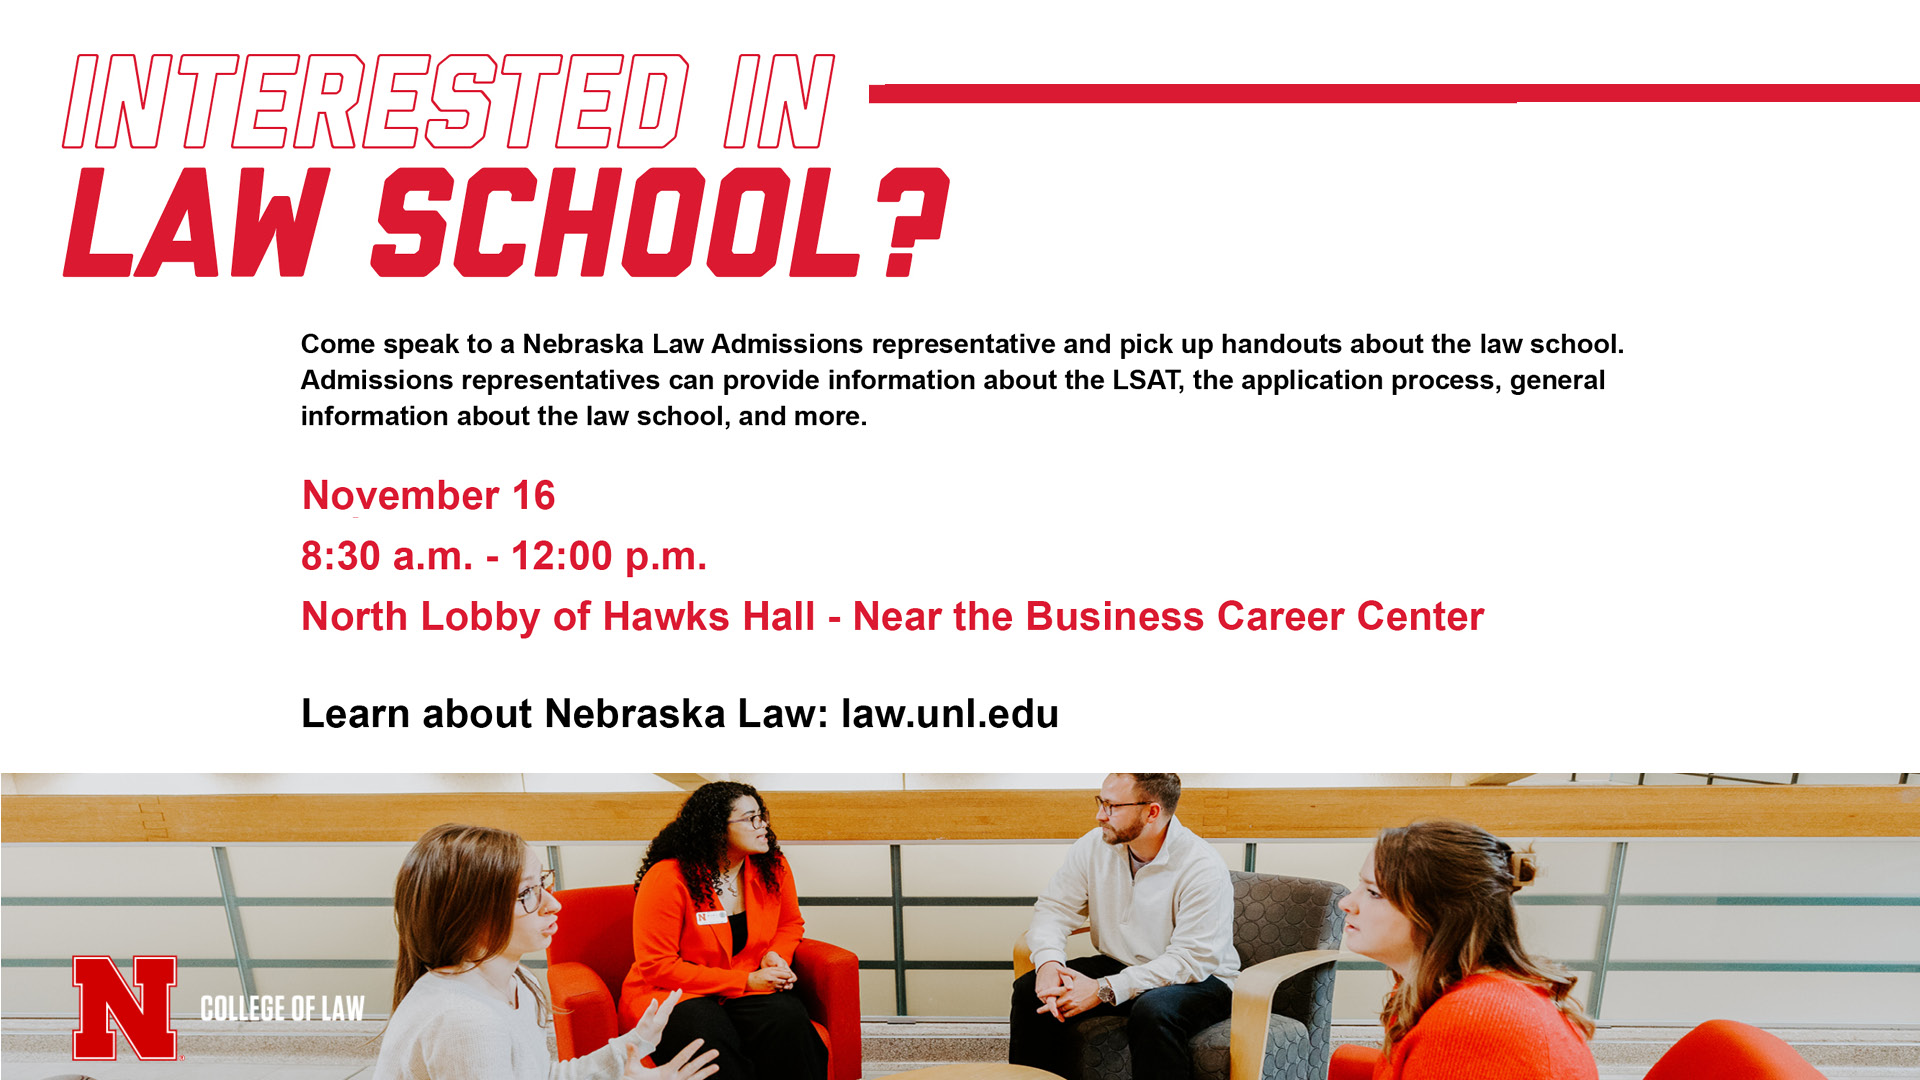 Interested in Law School | September 25 & November 16 from 8:30 a.m. - 12 p.m. in the North Lobby of Hawks Hall, near the Business Career Center. 